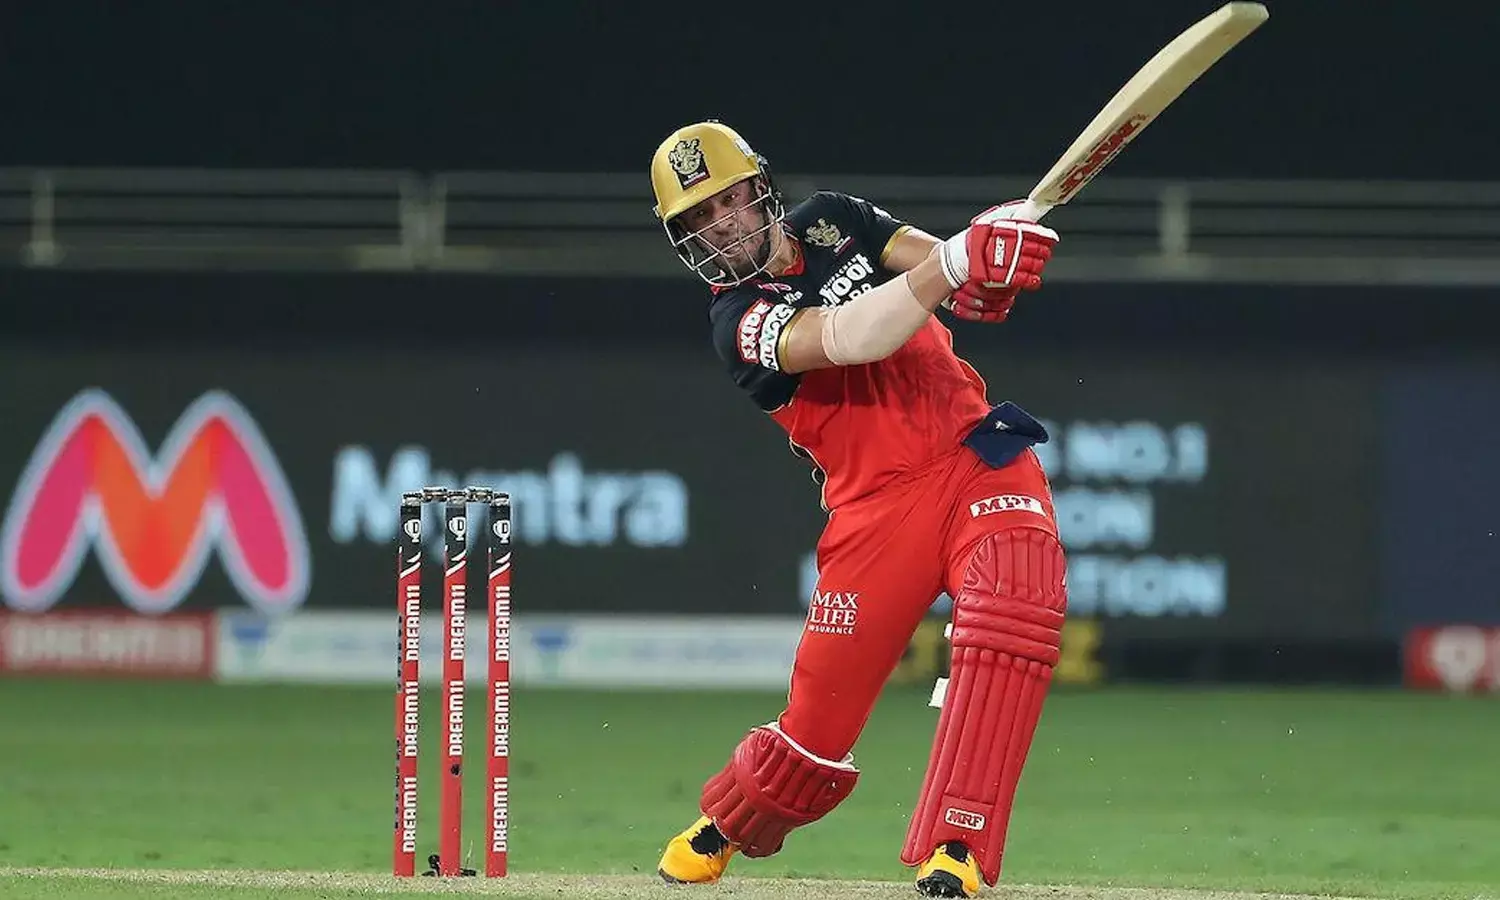 AB de Villiers played well and make a new record in IPL 2021